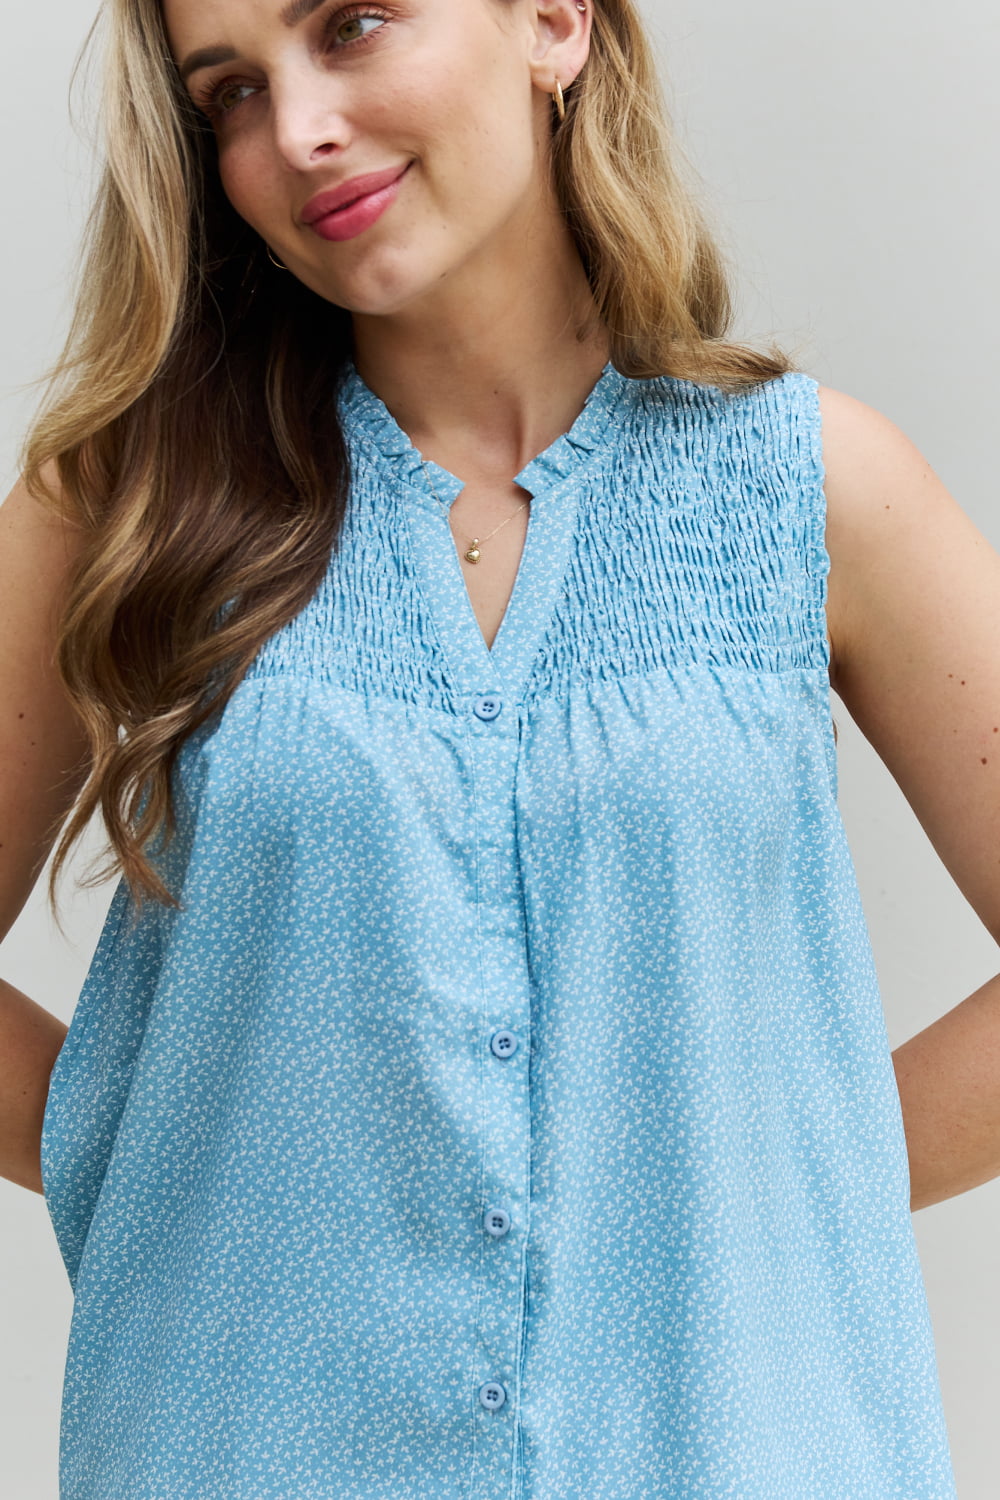 Women's Pastel Blue She Means Business Full Size Ruffled Floral Flare Shirt - D'Zani Fashion